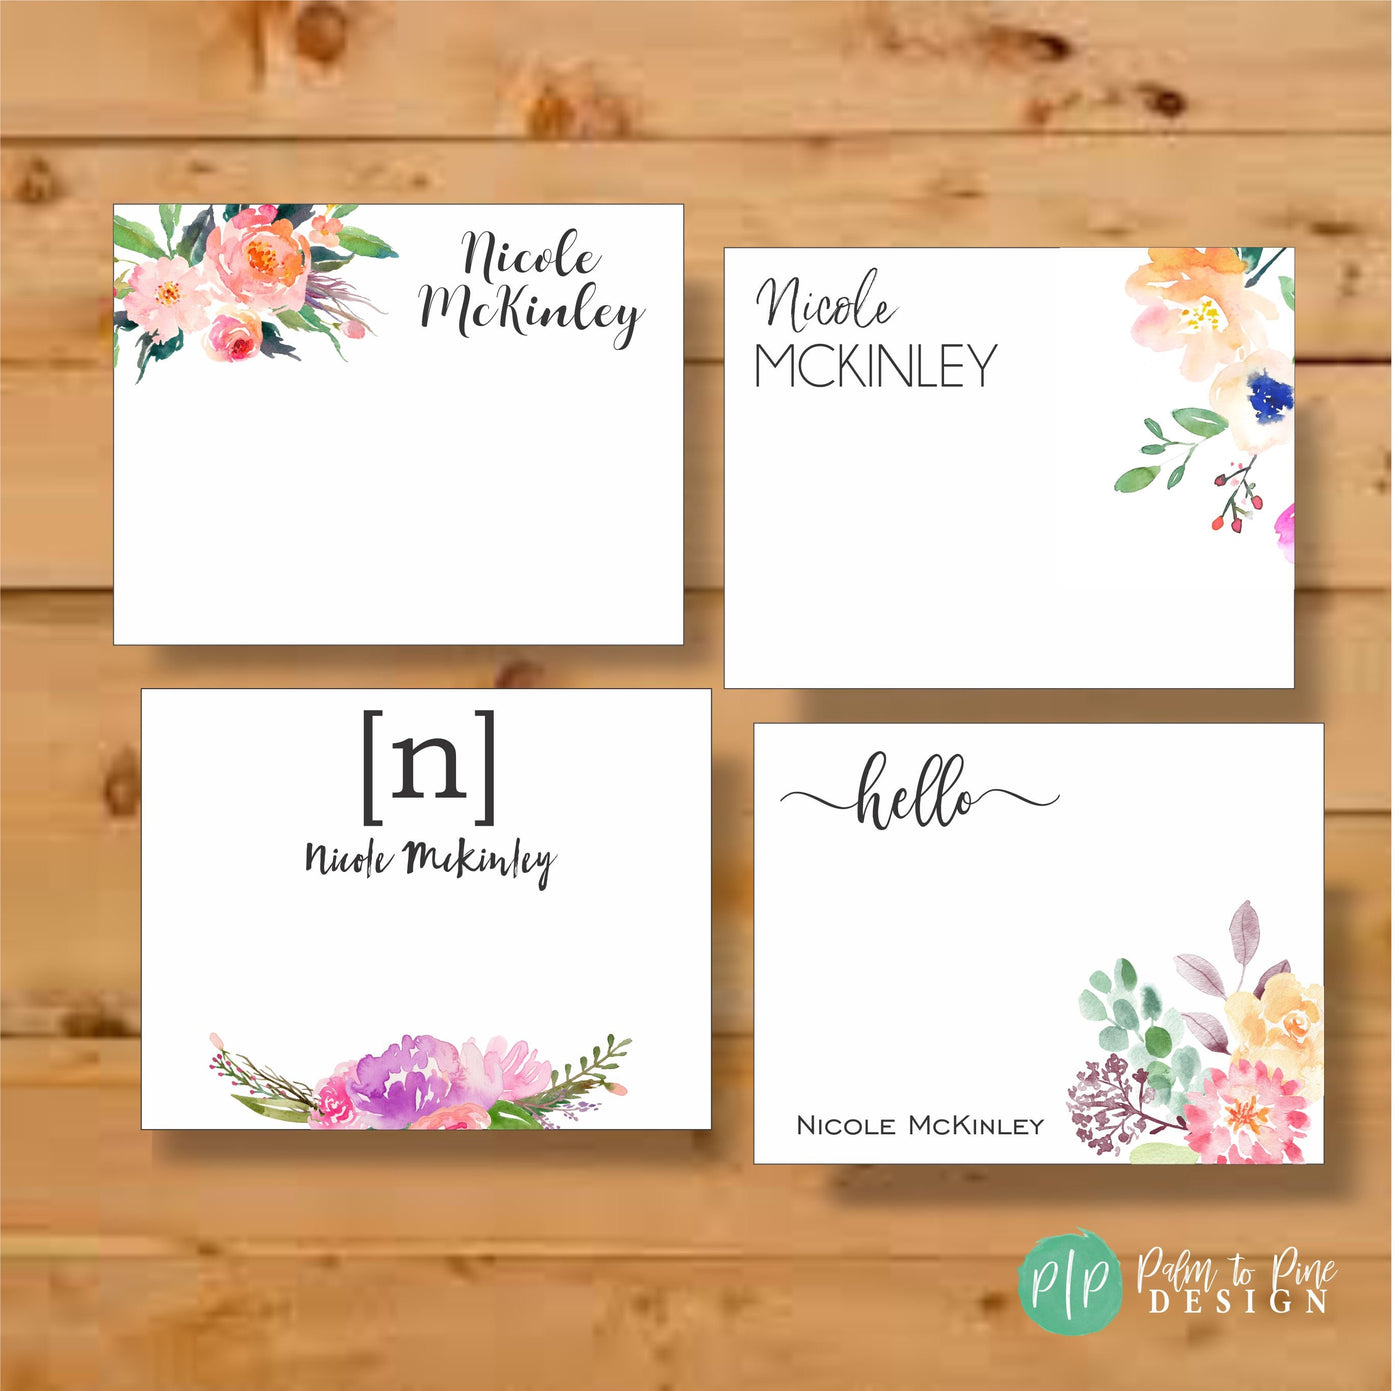 Personalized Stationary, Stationary Cards, Teacher Gift, Stationery Personalized, Stationary Set, Personalized Cards, Personalized Note Card